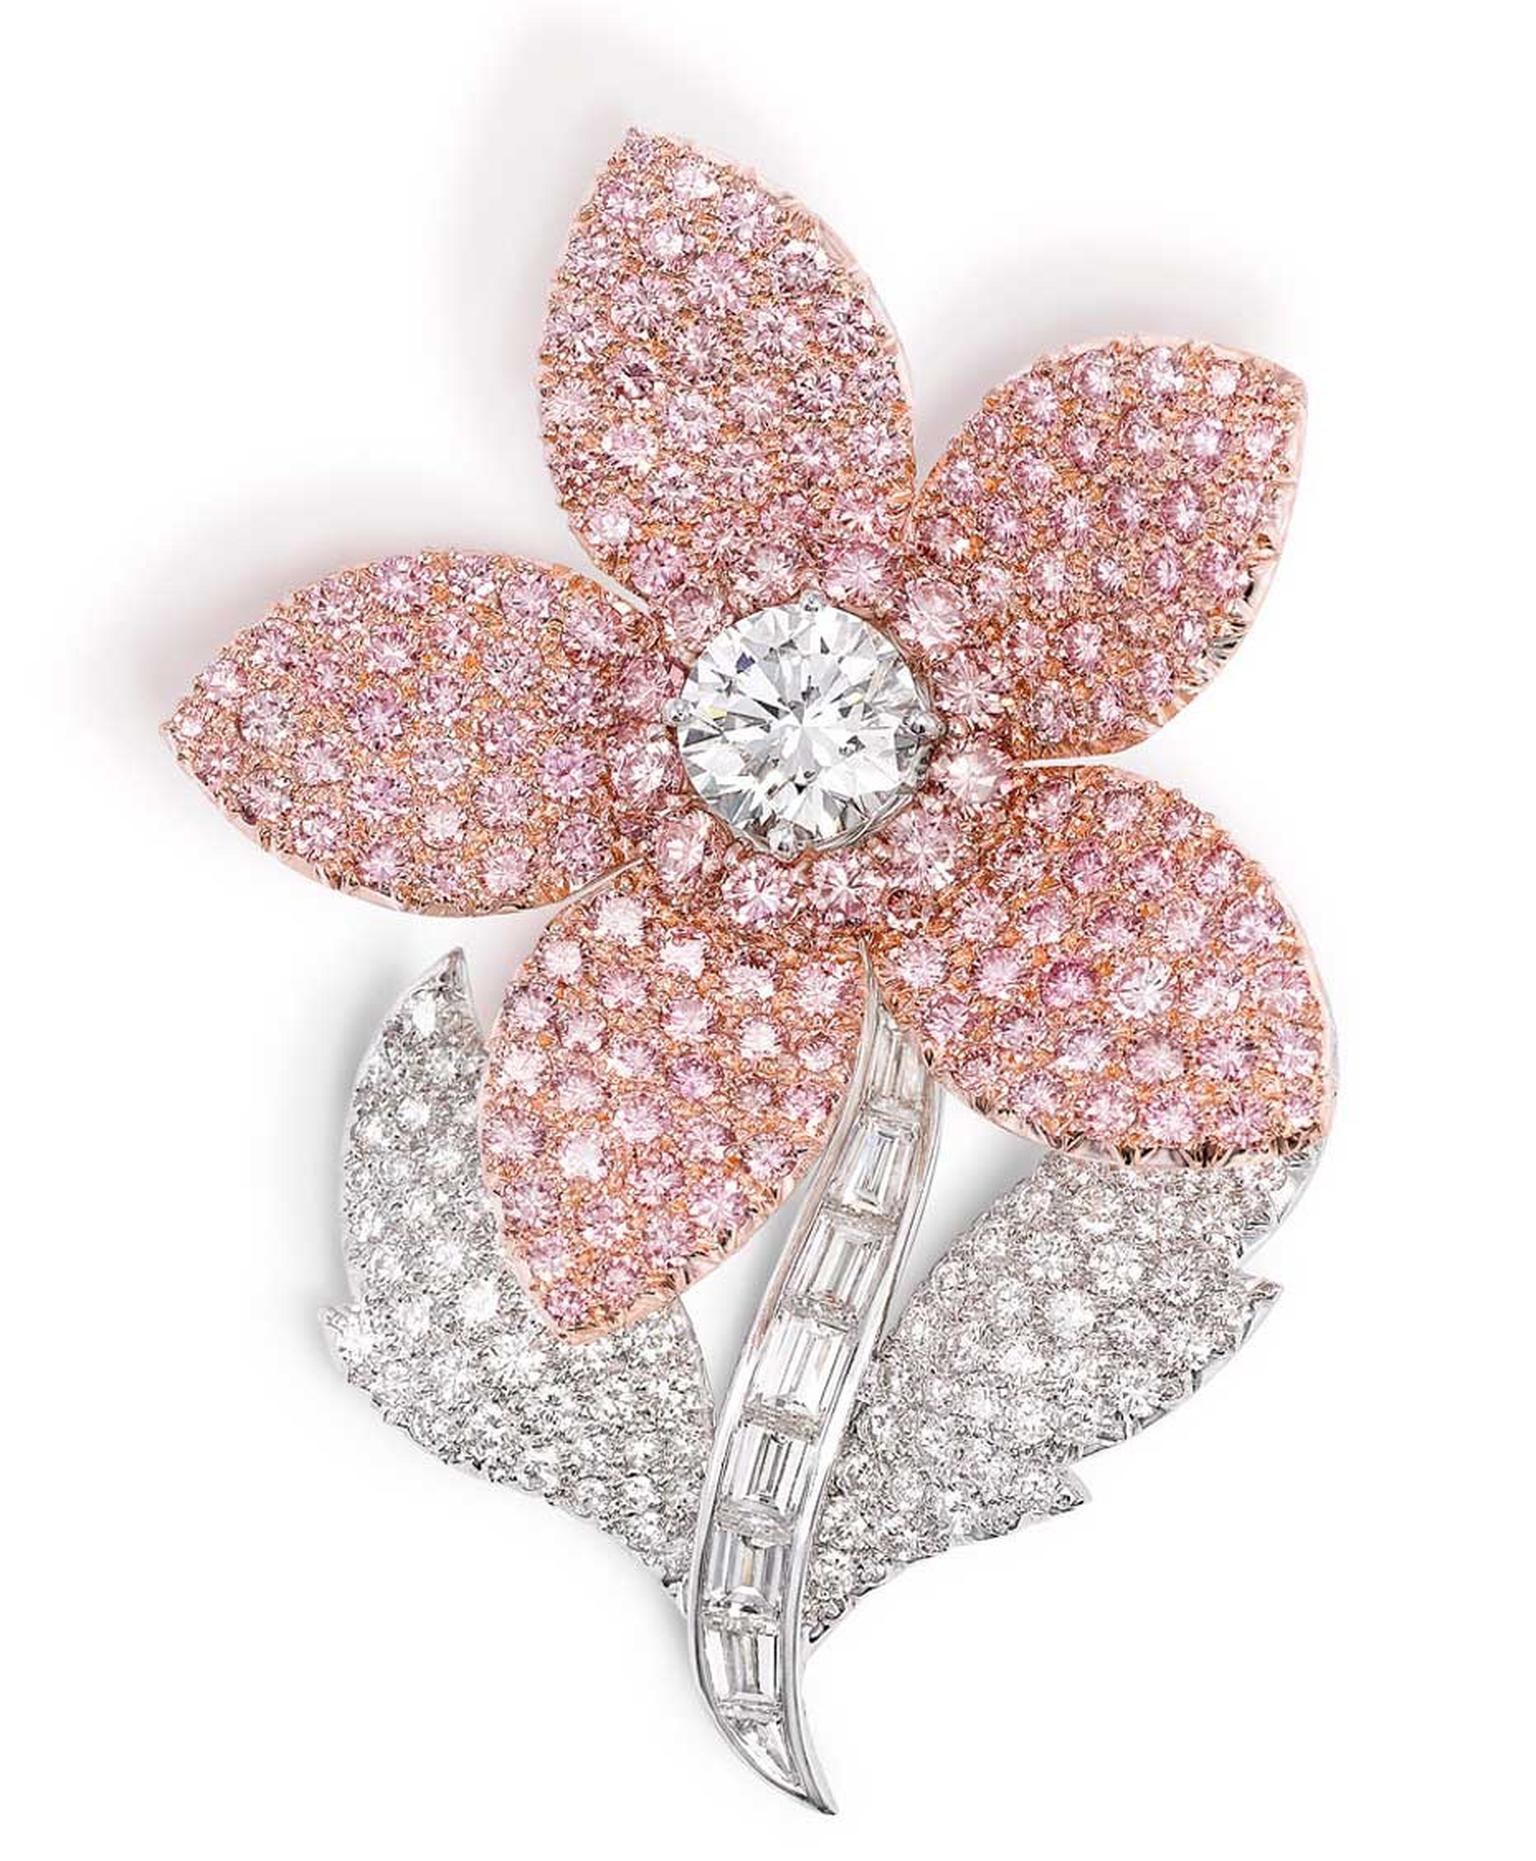 Graff pink and white diamond flower brooch featuring 177 pink diamonds totalling 9.64ct. The brooch formed part of the Argyle Pink Diamonds company's exhibition of pink diamonds in London in 2012.